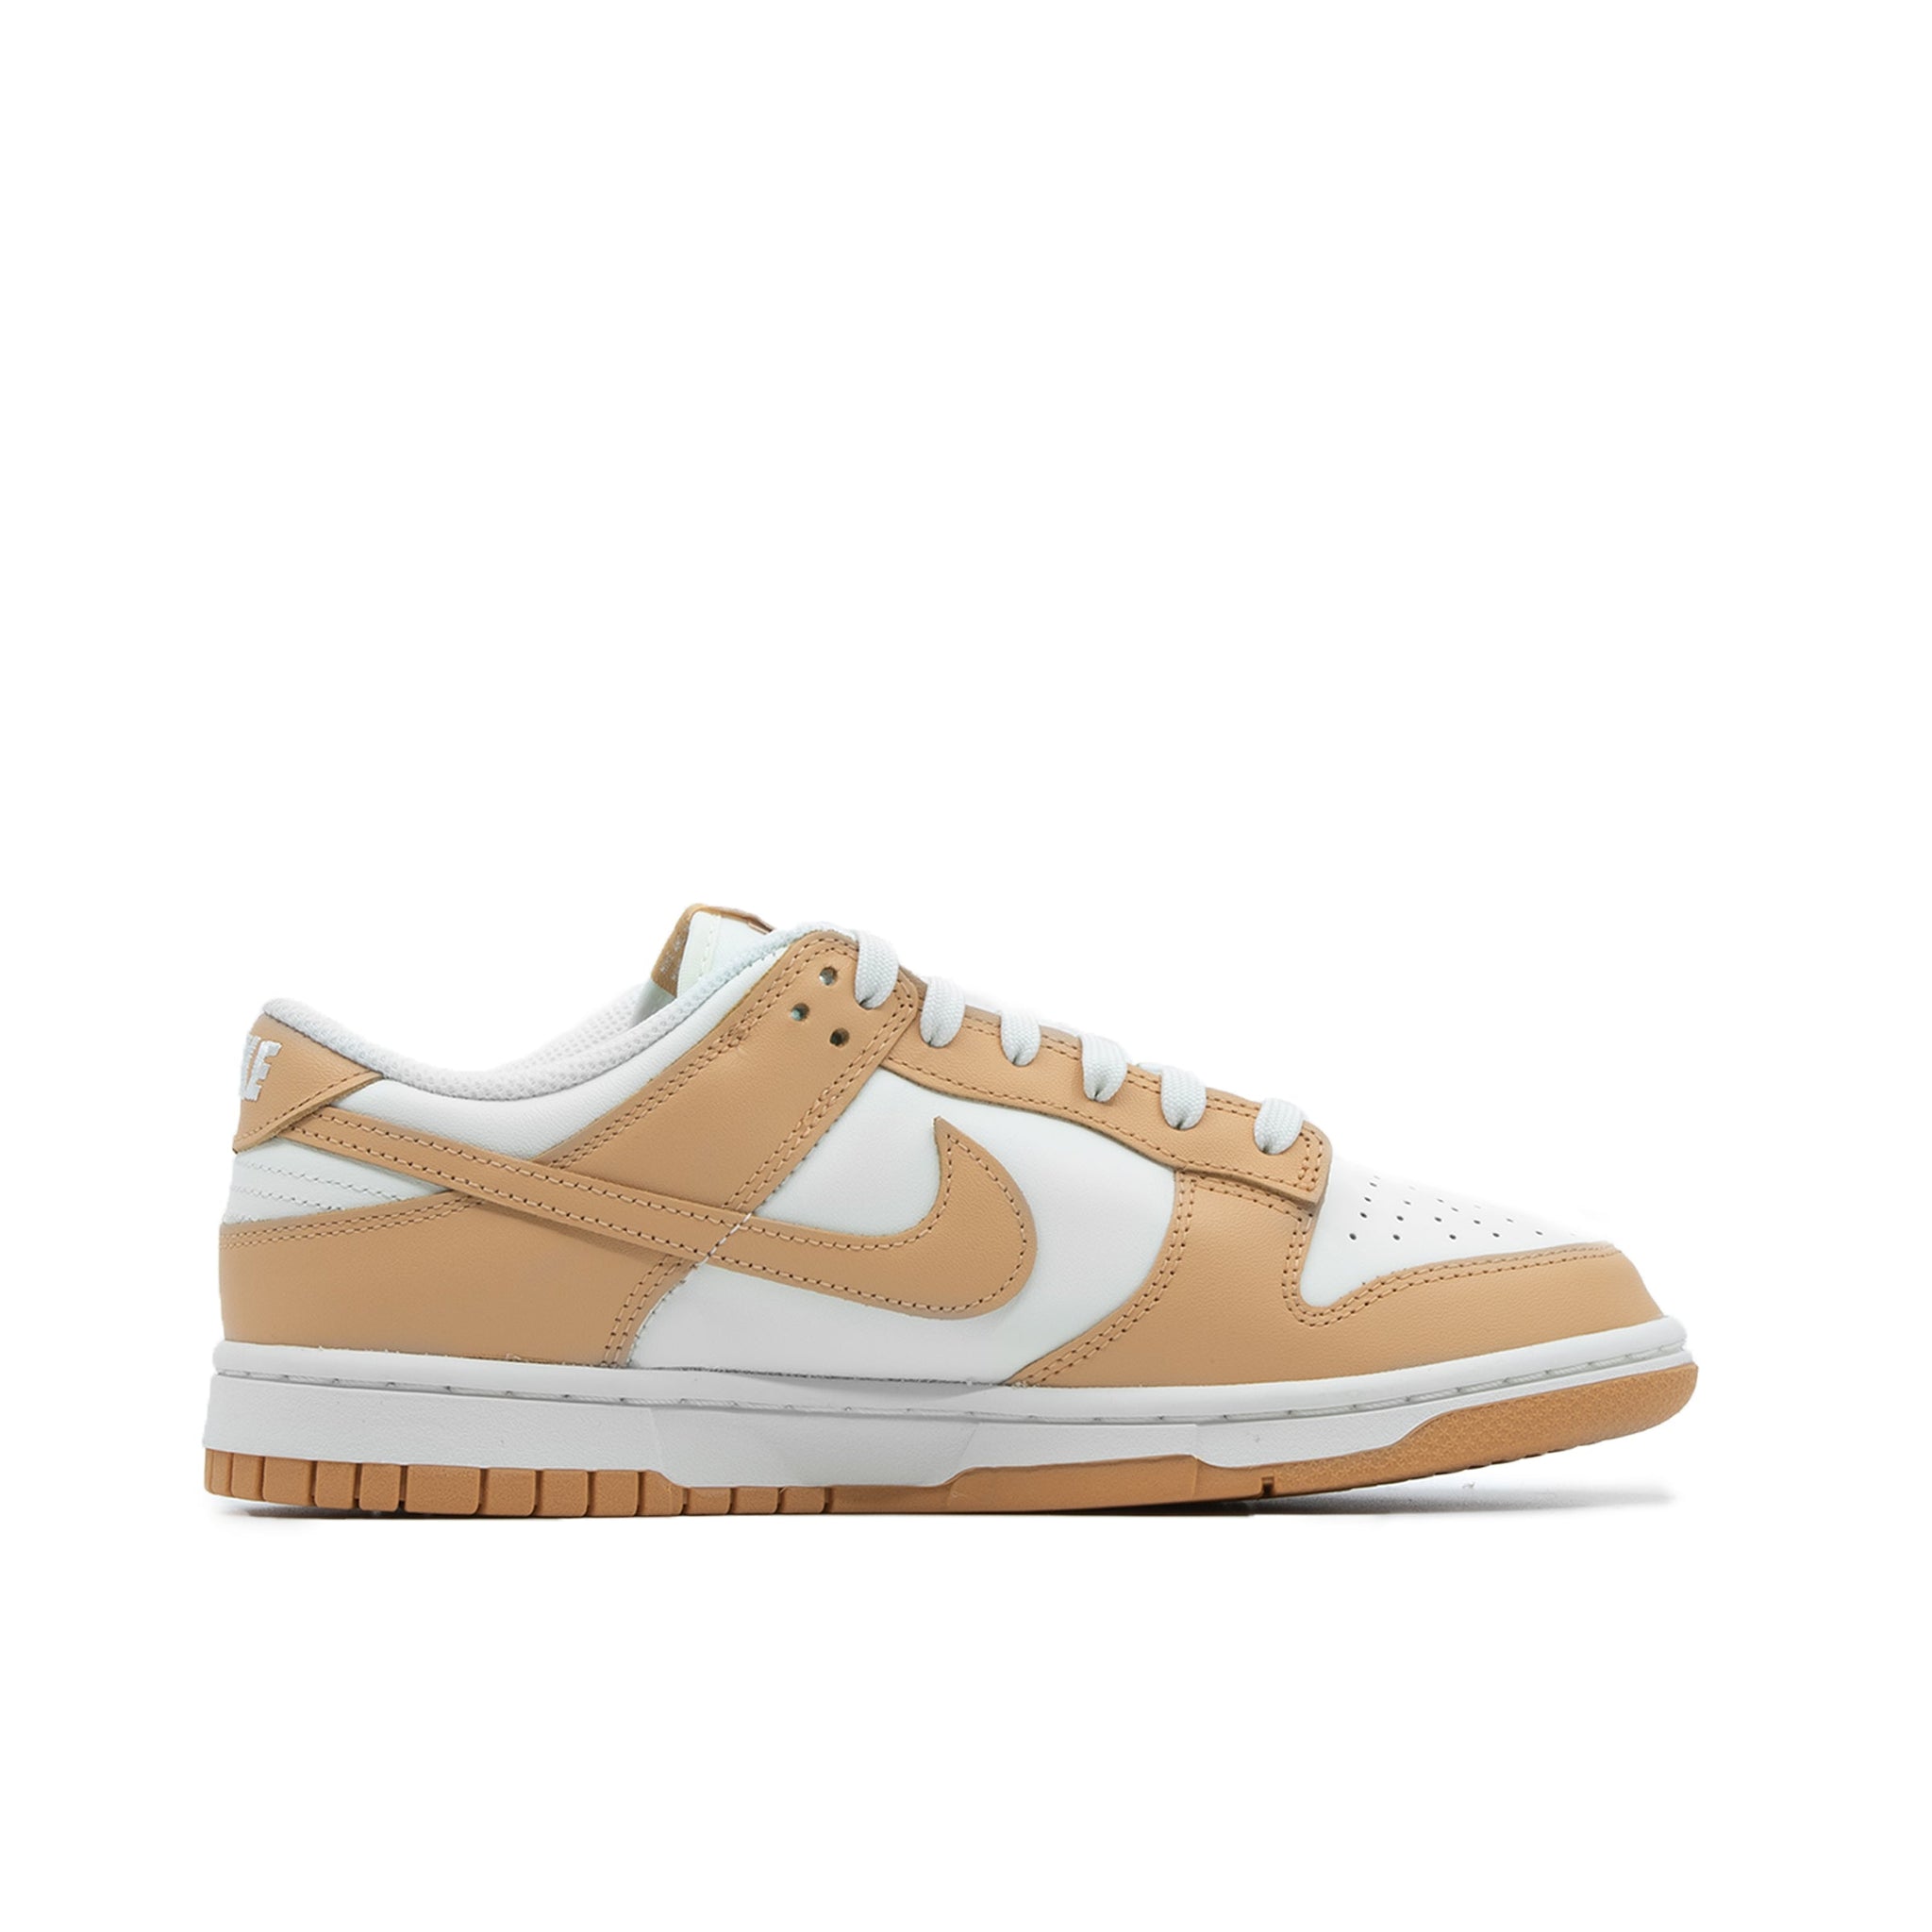 NIKE DUNK LOW WMNS HARVEST MOON